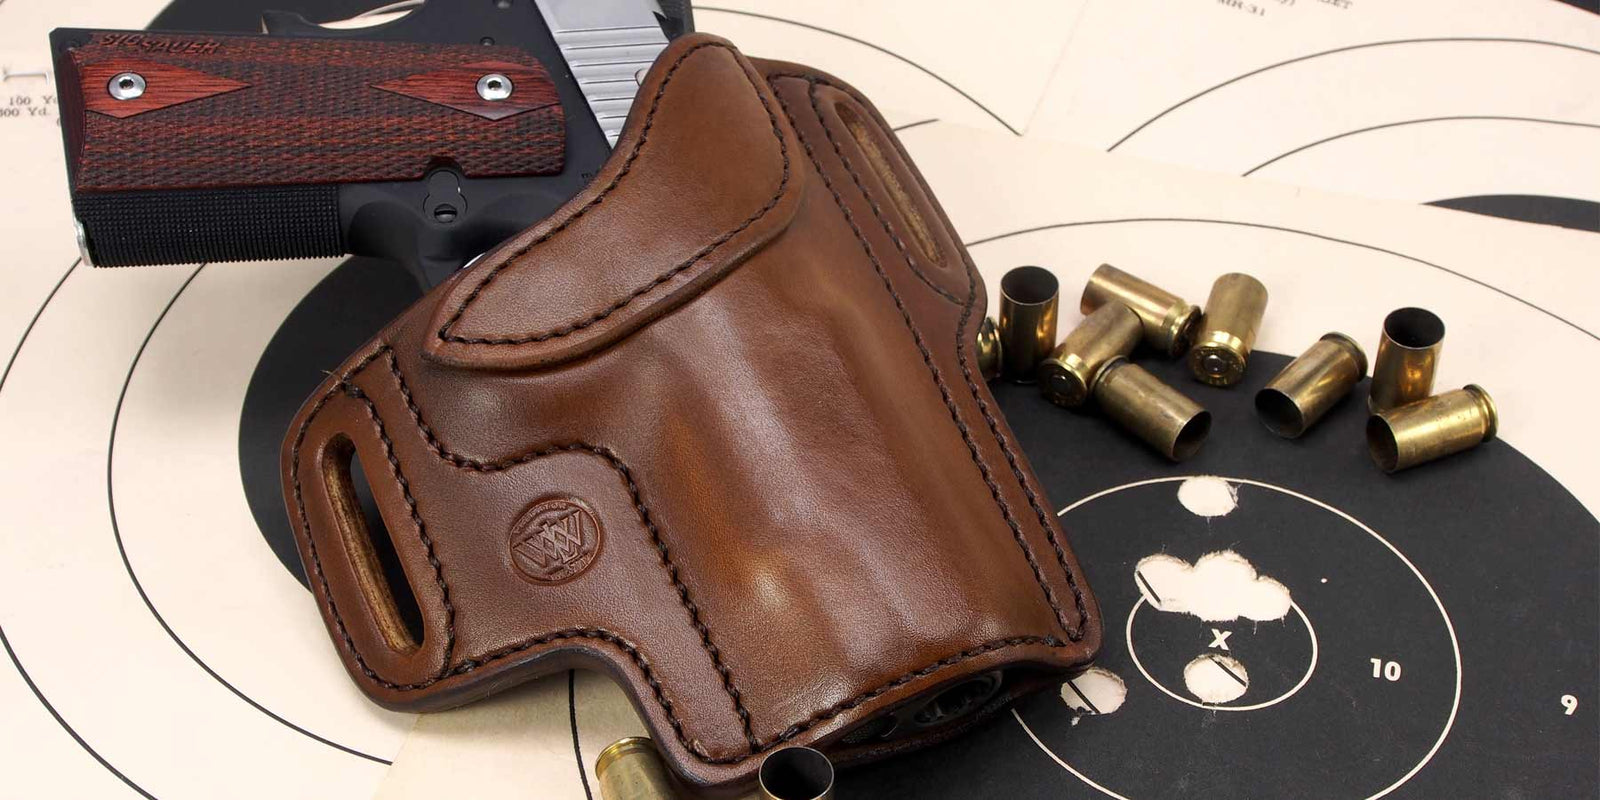 Premium Quality Leather Concealed Carry Holsters | Handmade In The USA